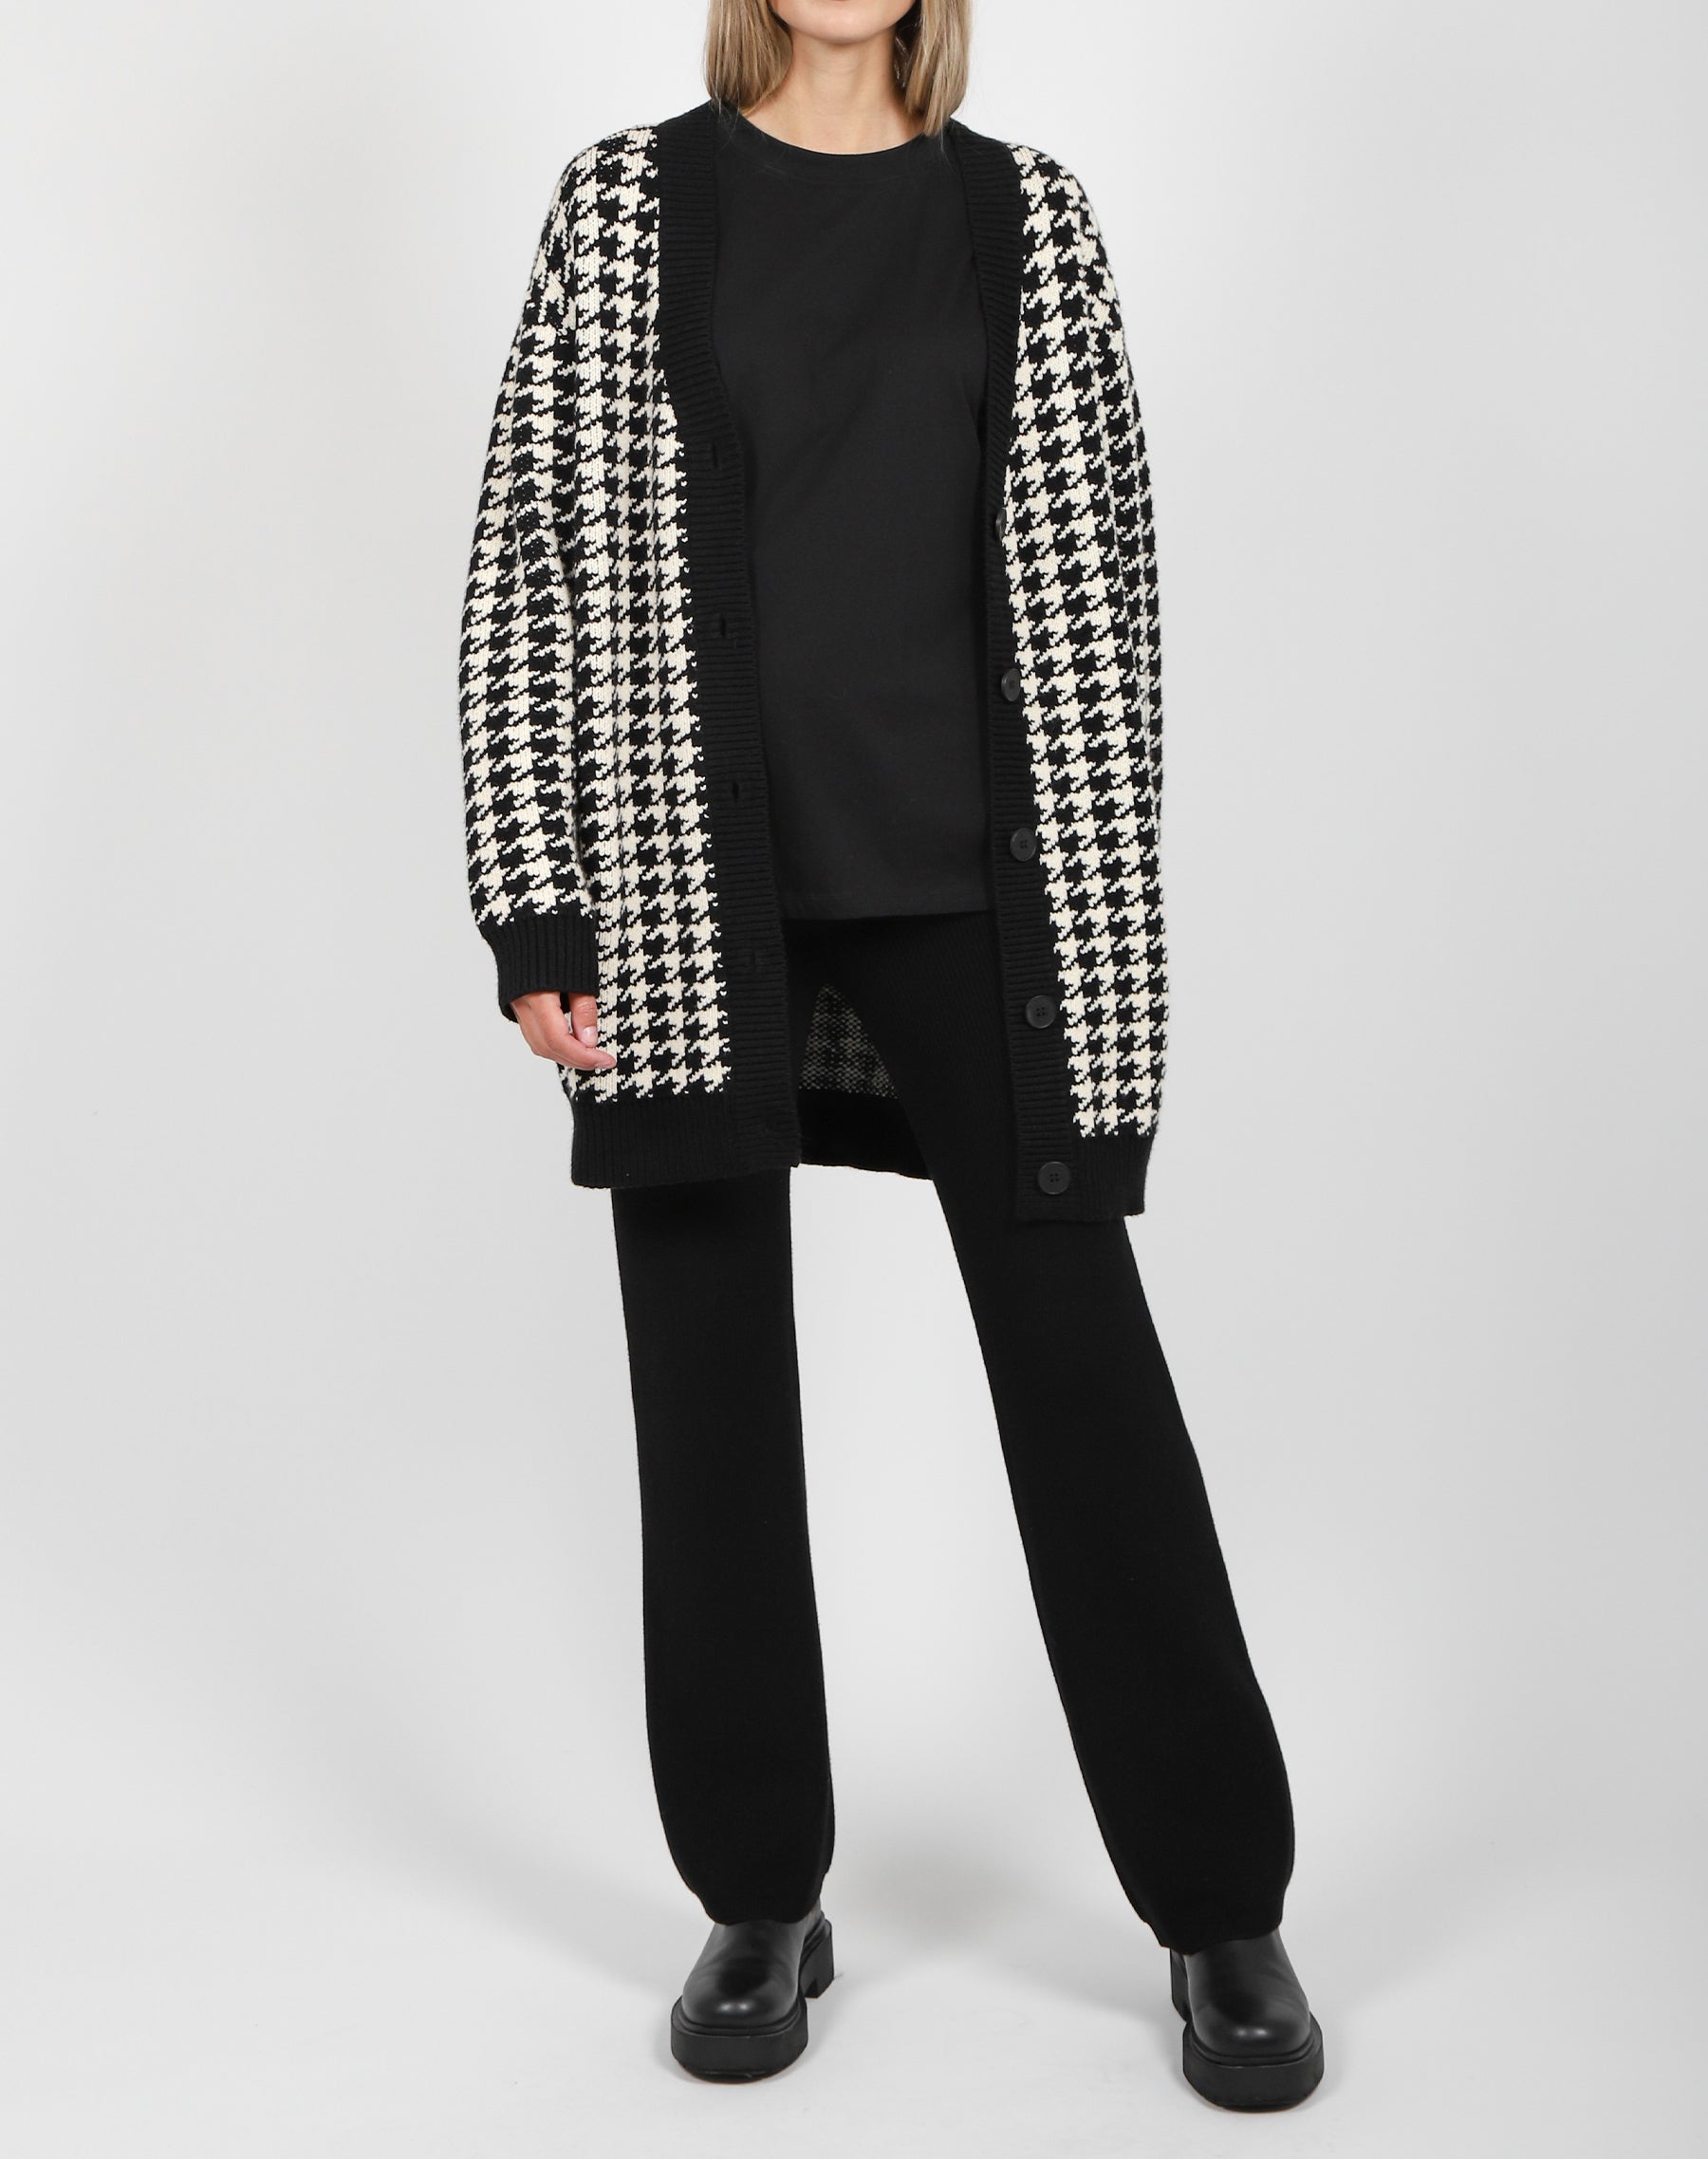 The Houndstooth Knit Cardigan | Black and Cream